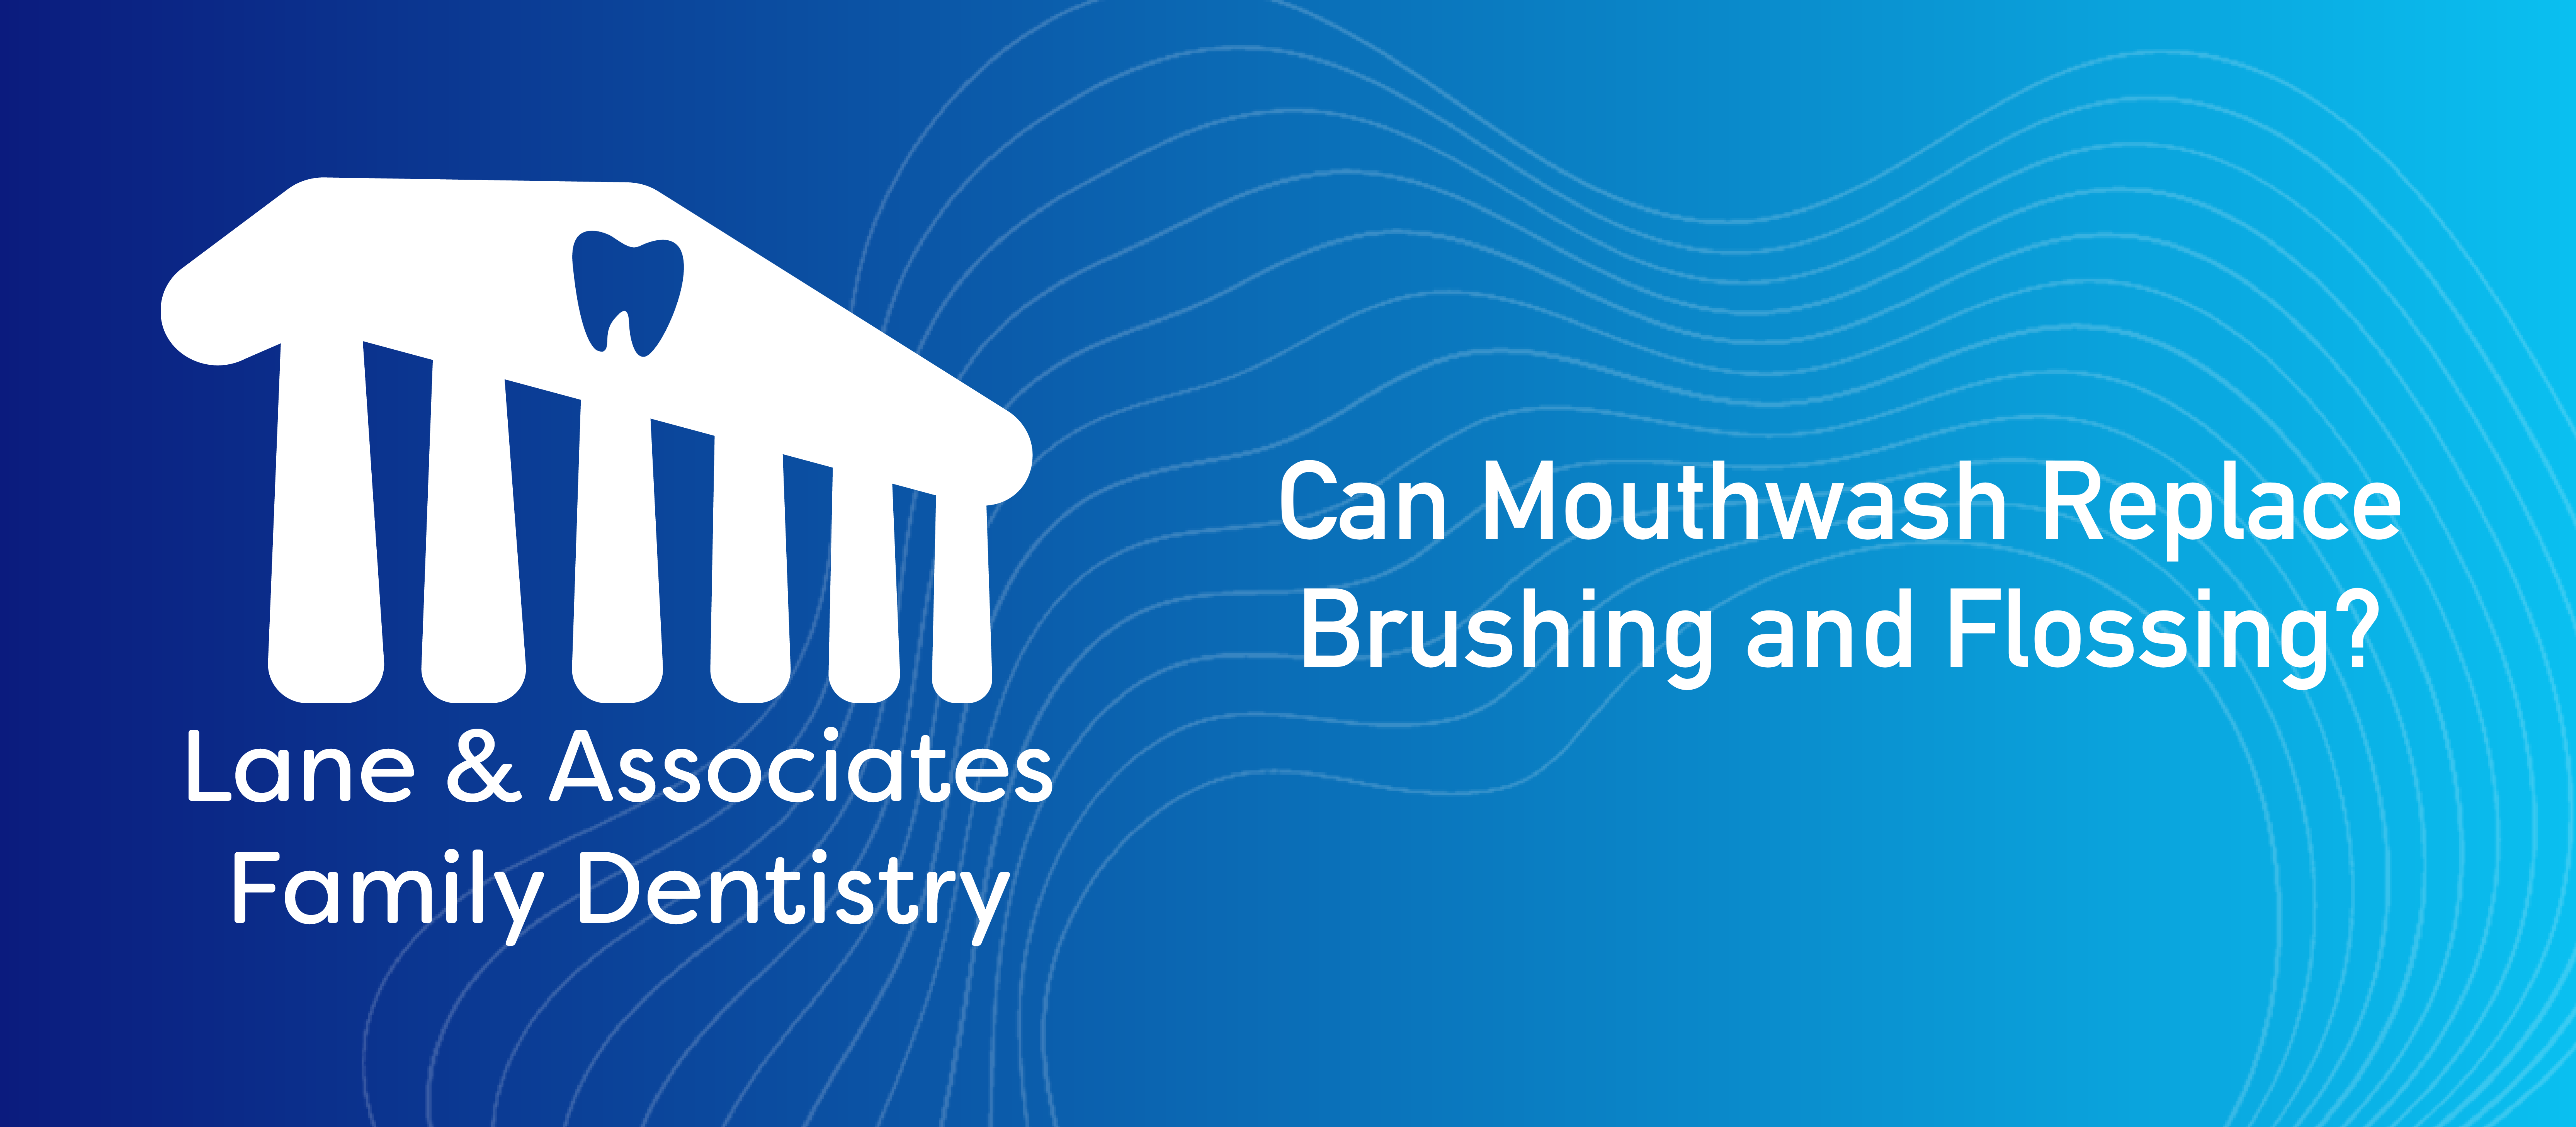 Can mouthwash replace brushing and flossing? featured image title